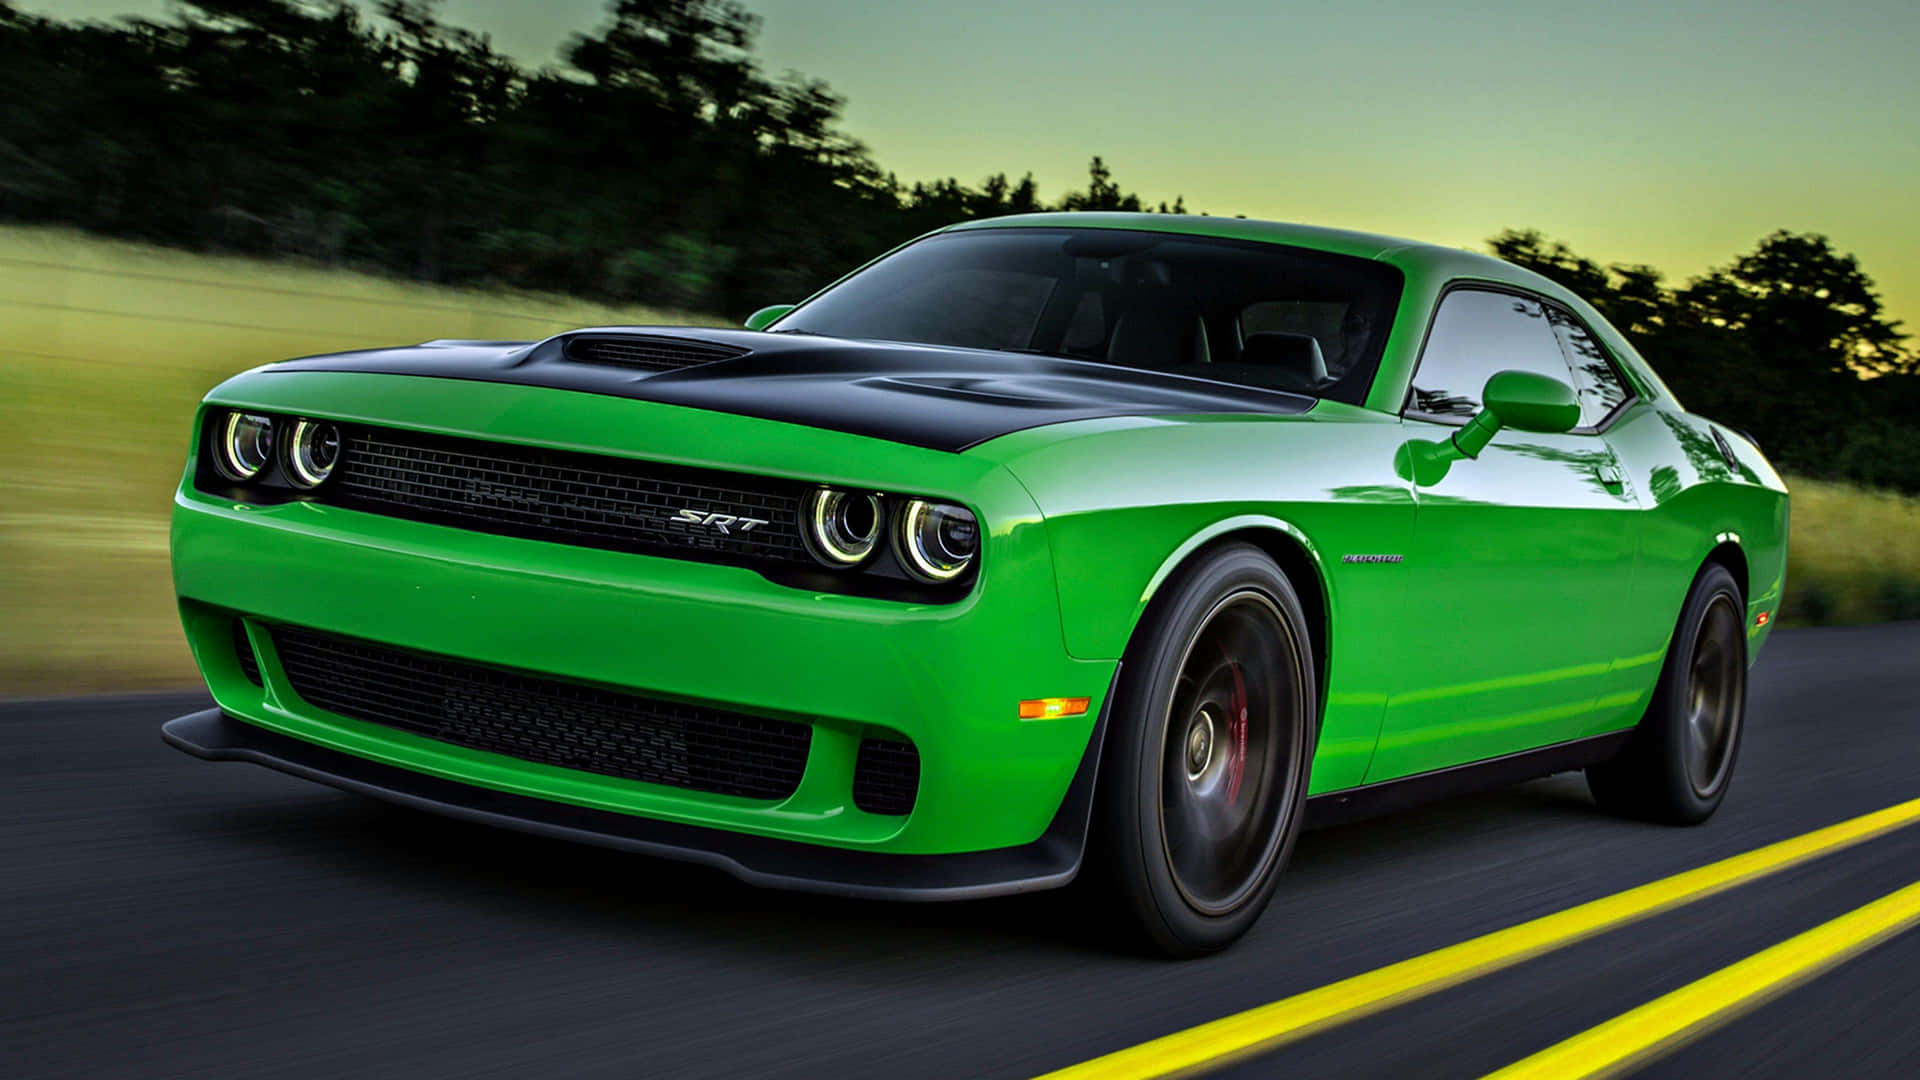 Green Dodge Challenger S R T On The Road Wallpaper